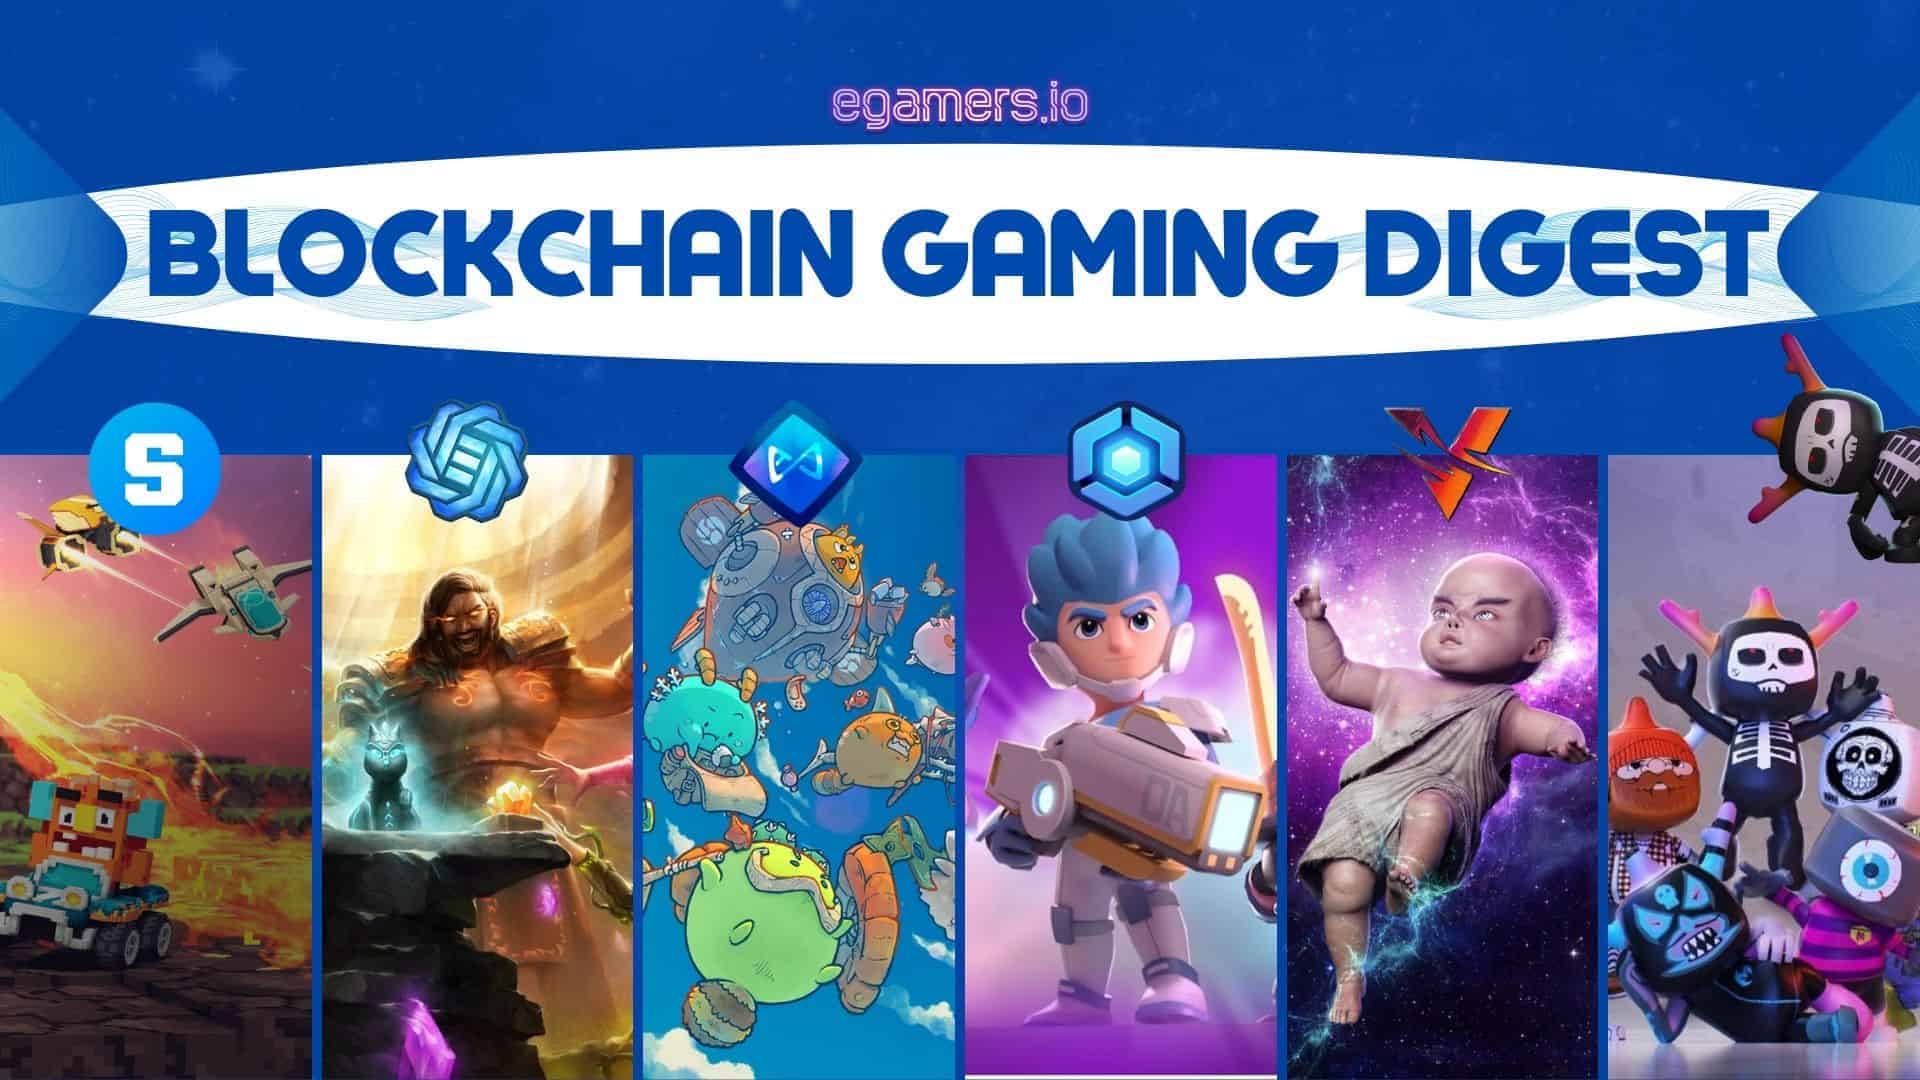 BLOCKCHAIN GAMING DIGEST new Spells of Genesis is a TCG game that doesn't require an introduction. The first of its kind on the blockchain, it allowed players to convert their in-game cards into blockchain-based digital assets in 2017.